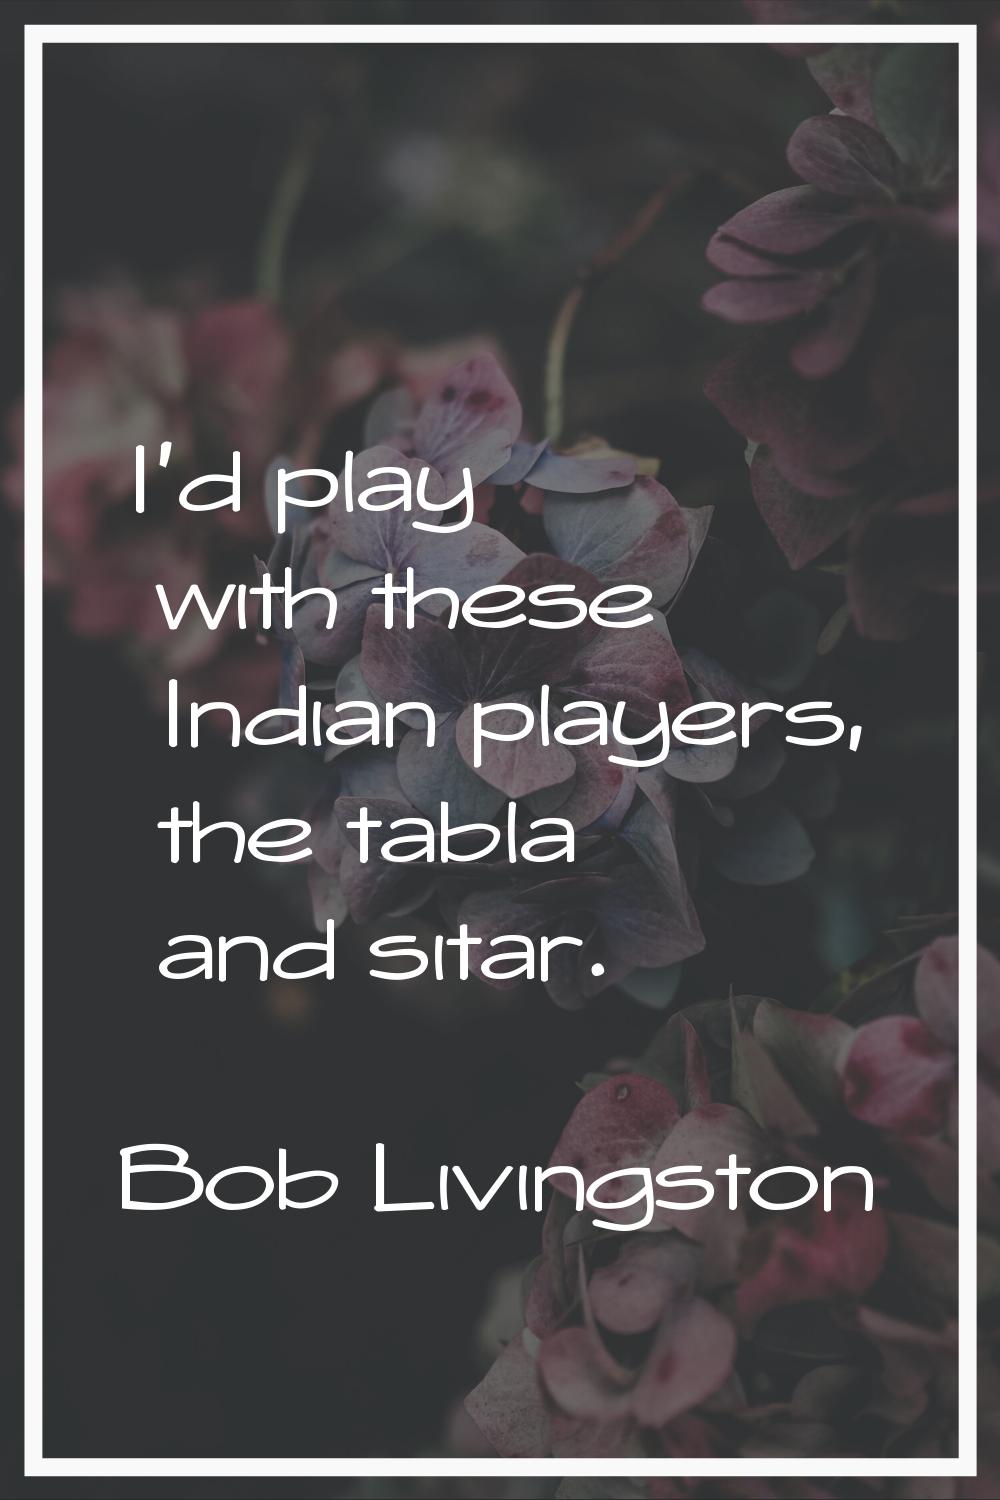 I'd play with these Indian players, the tabla and sitar.